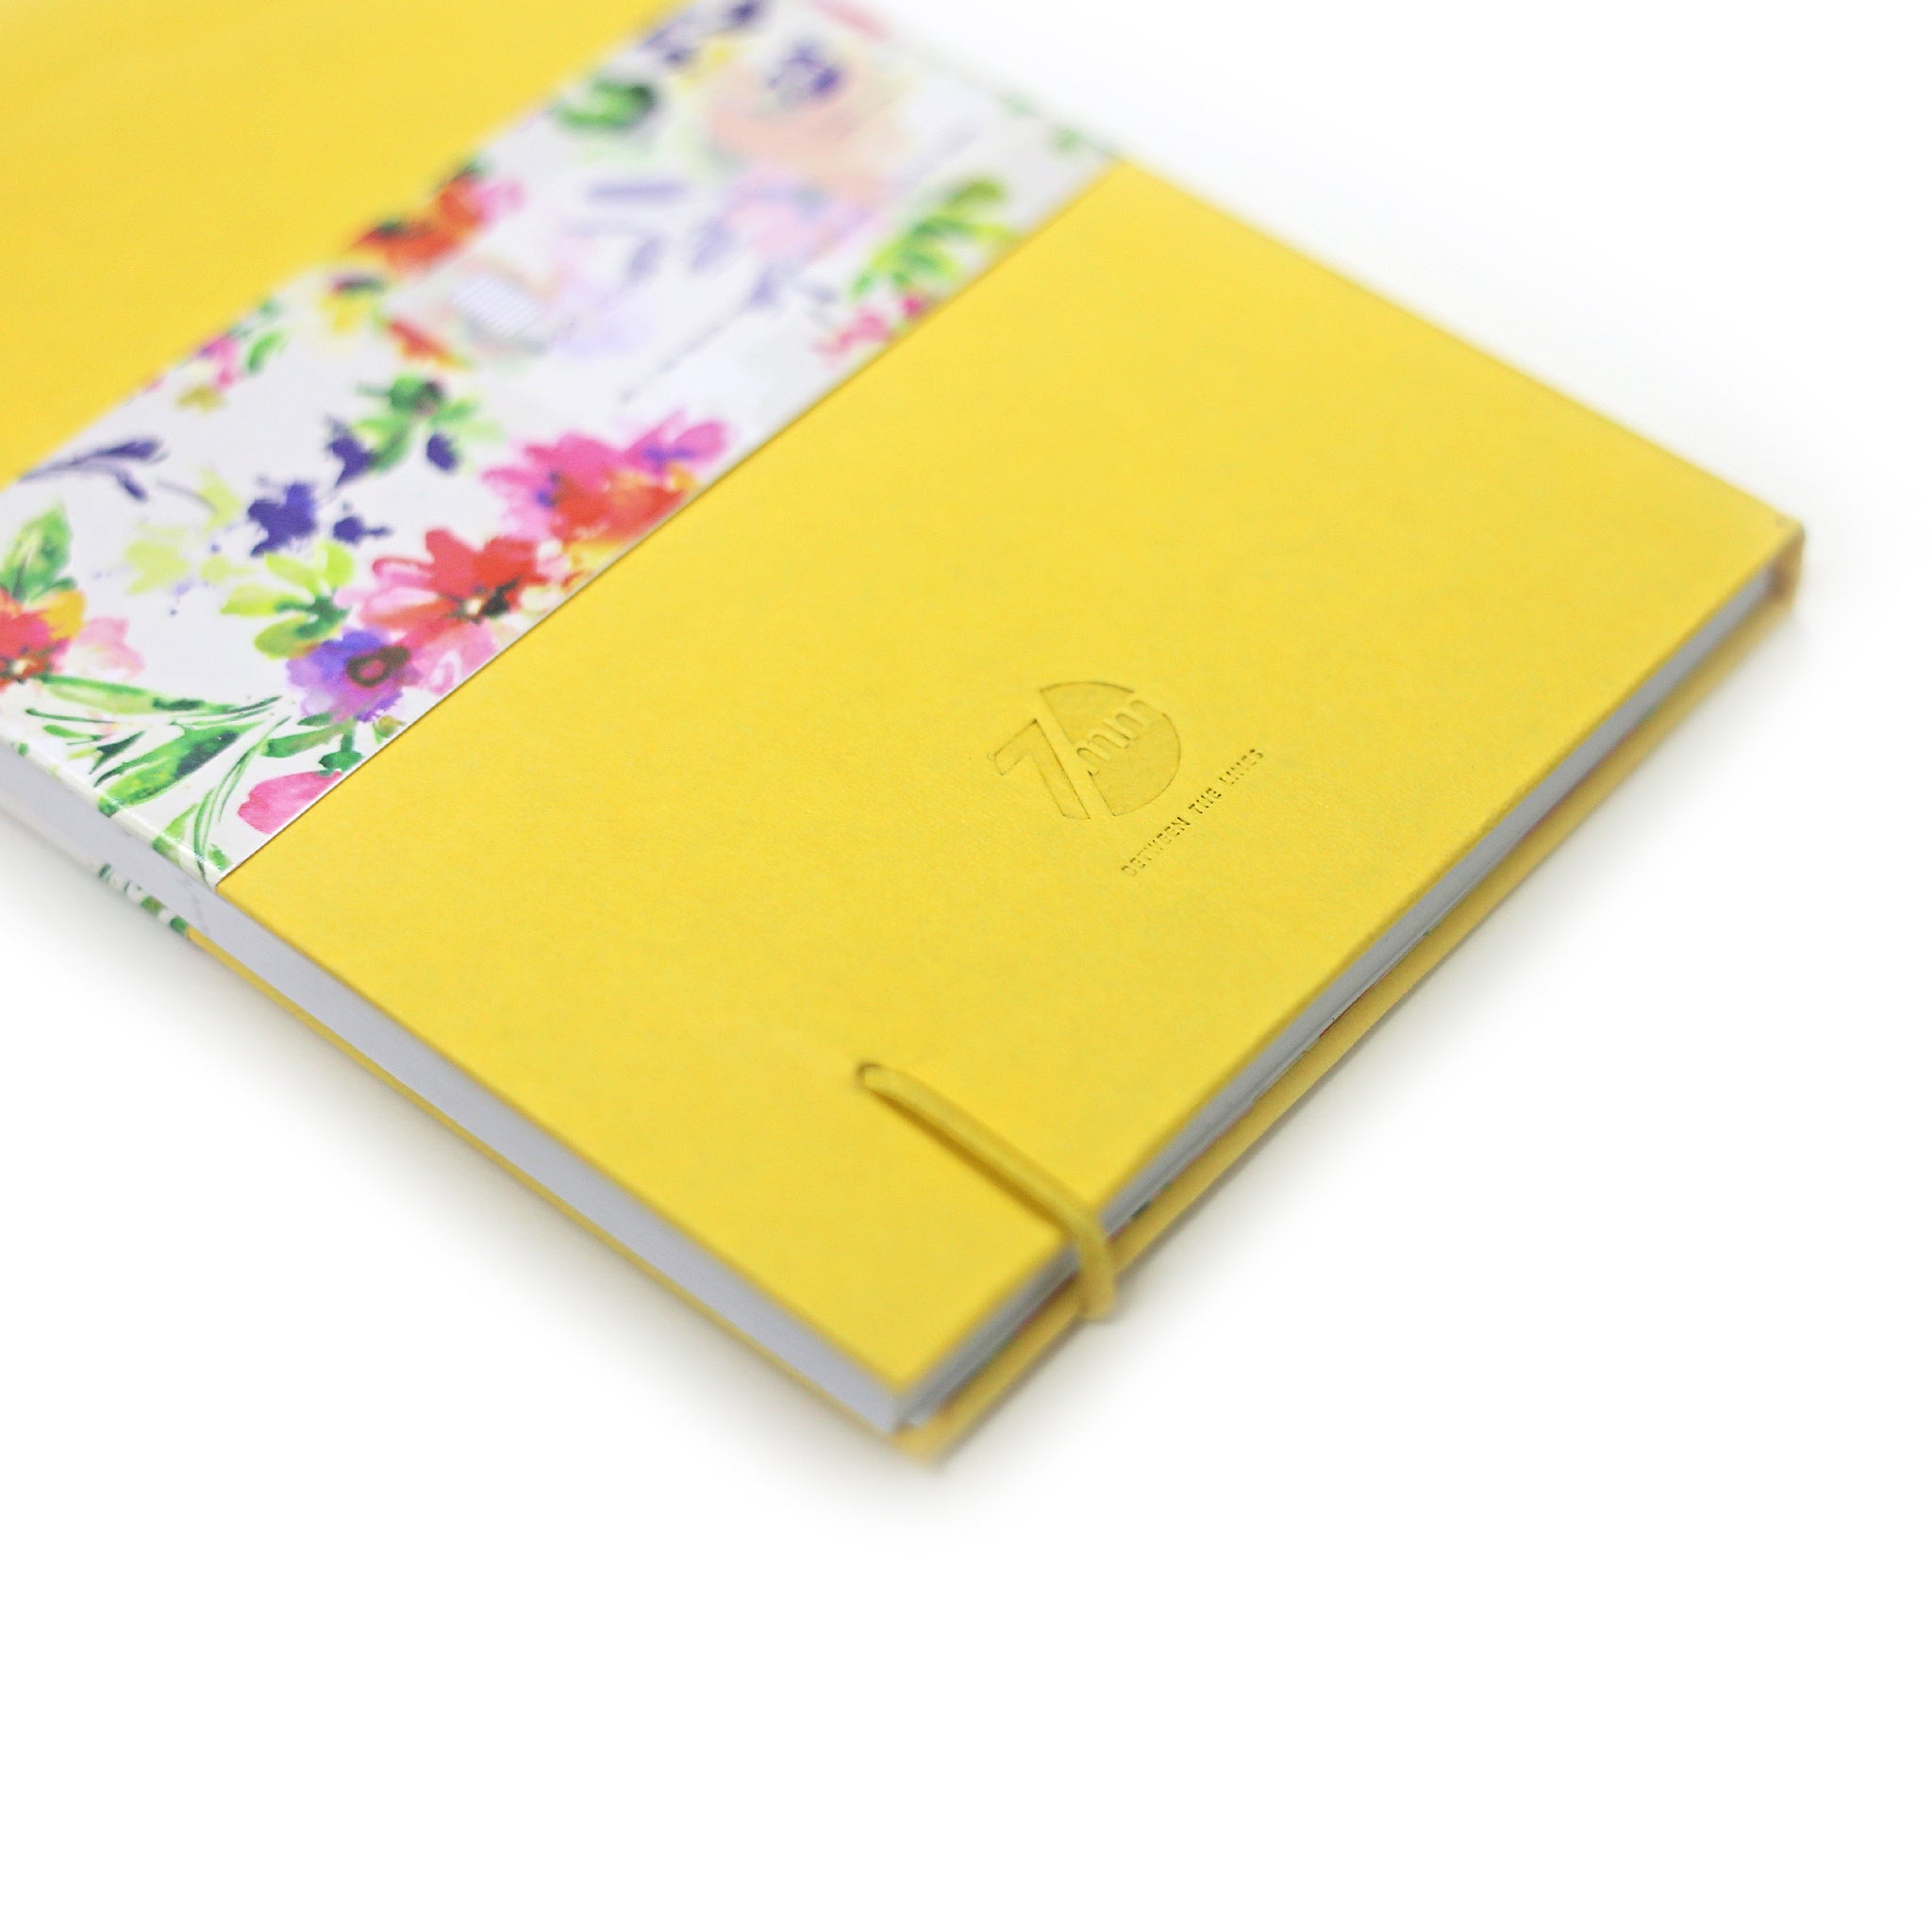 Pop Collective (Yellow) - 7mm - Fine Paper Stationery